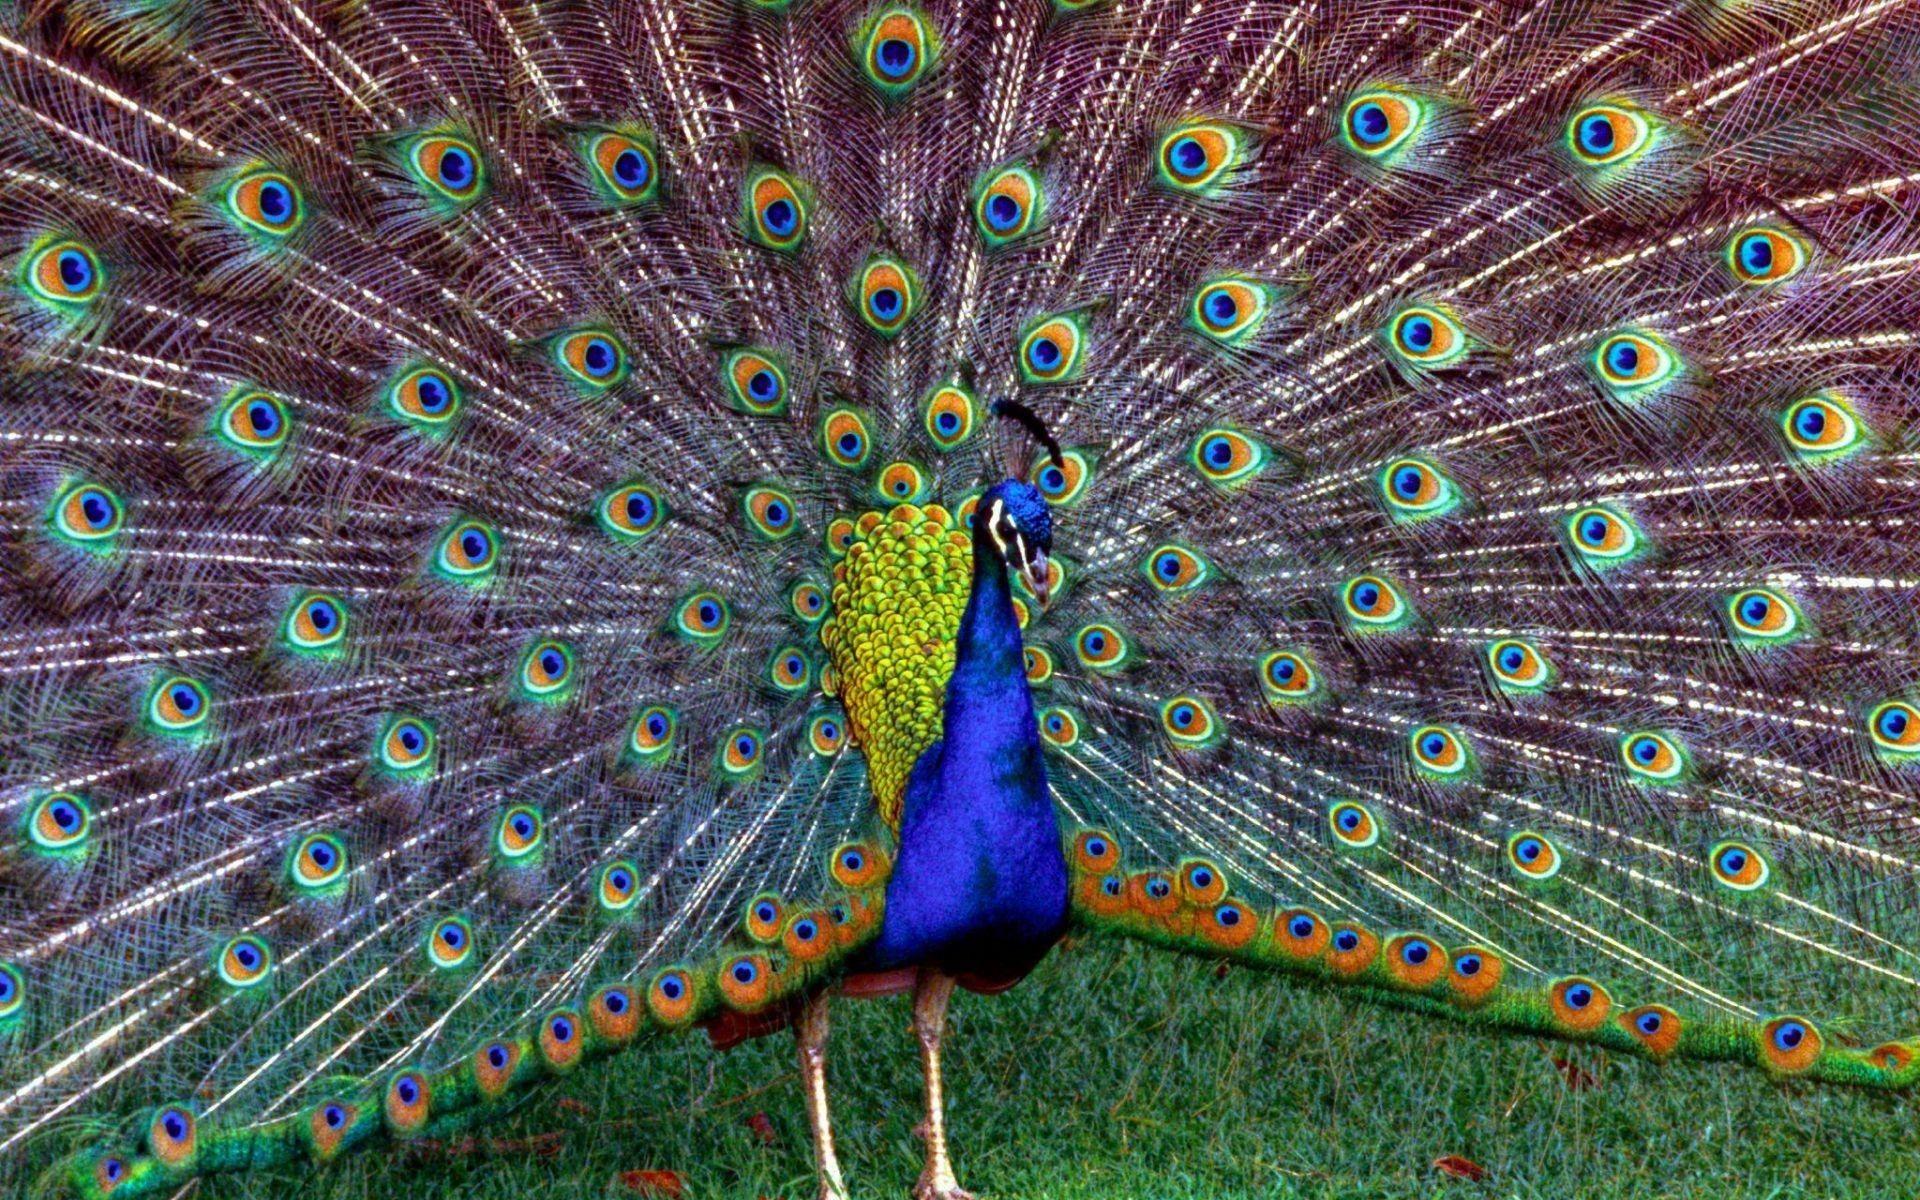 Wallpaper of Peacock Feathers HD